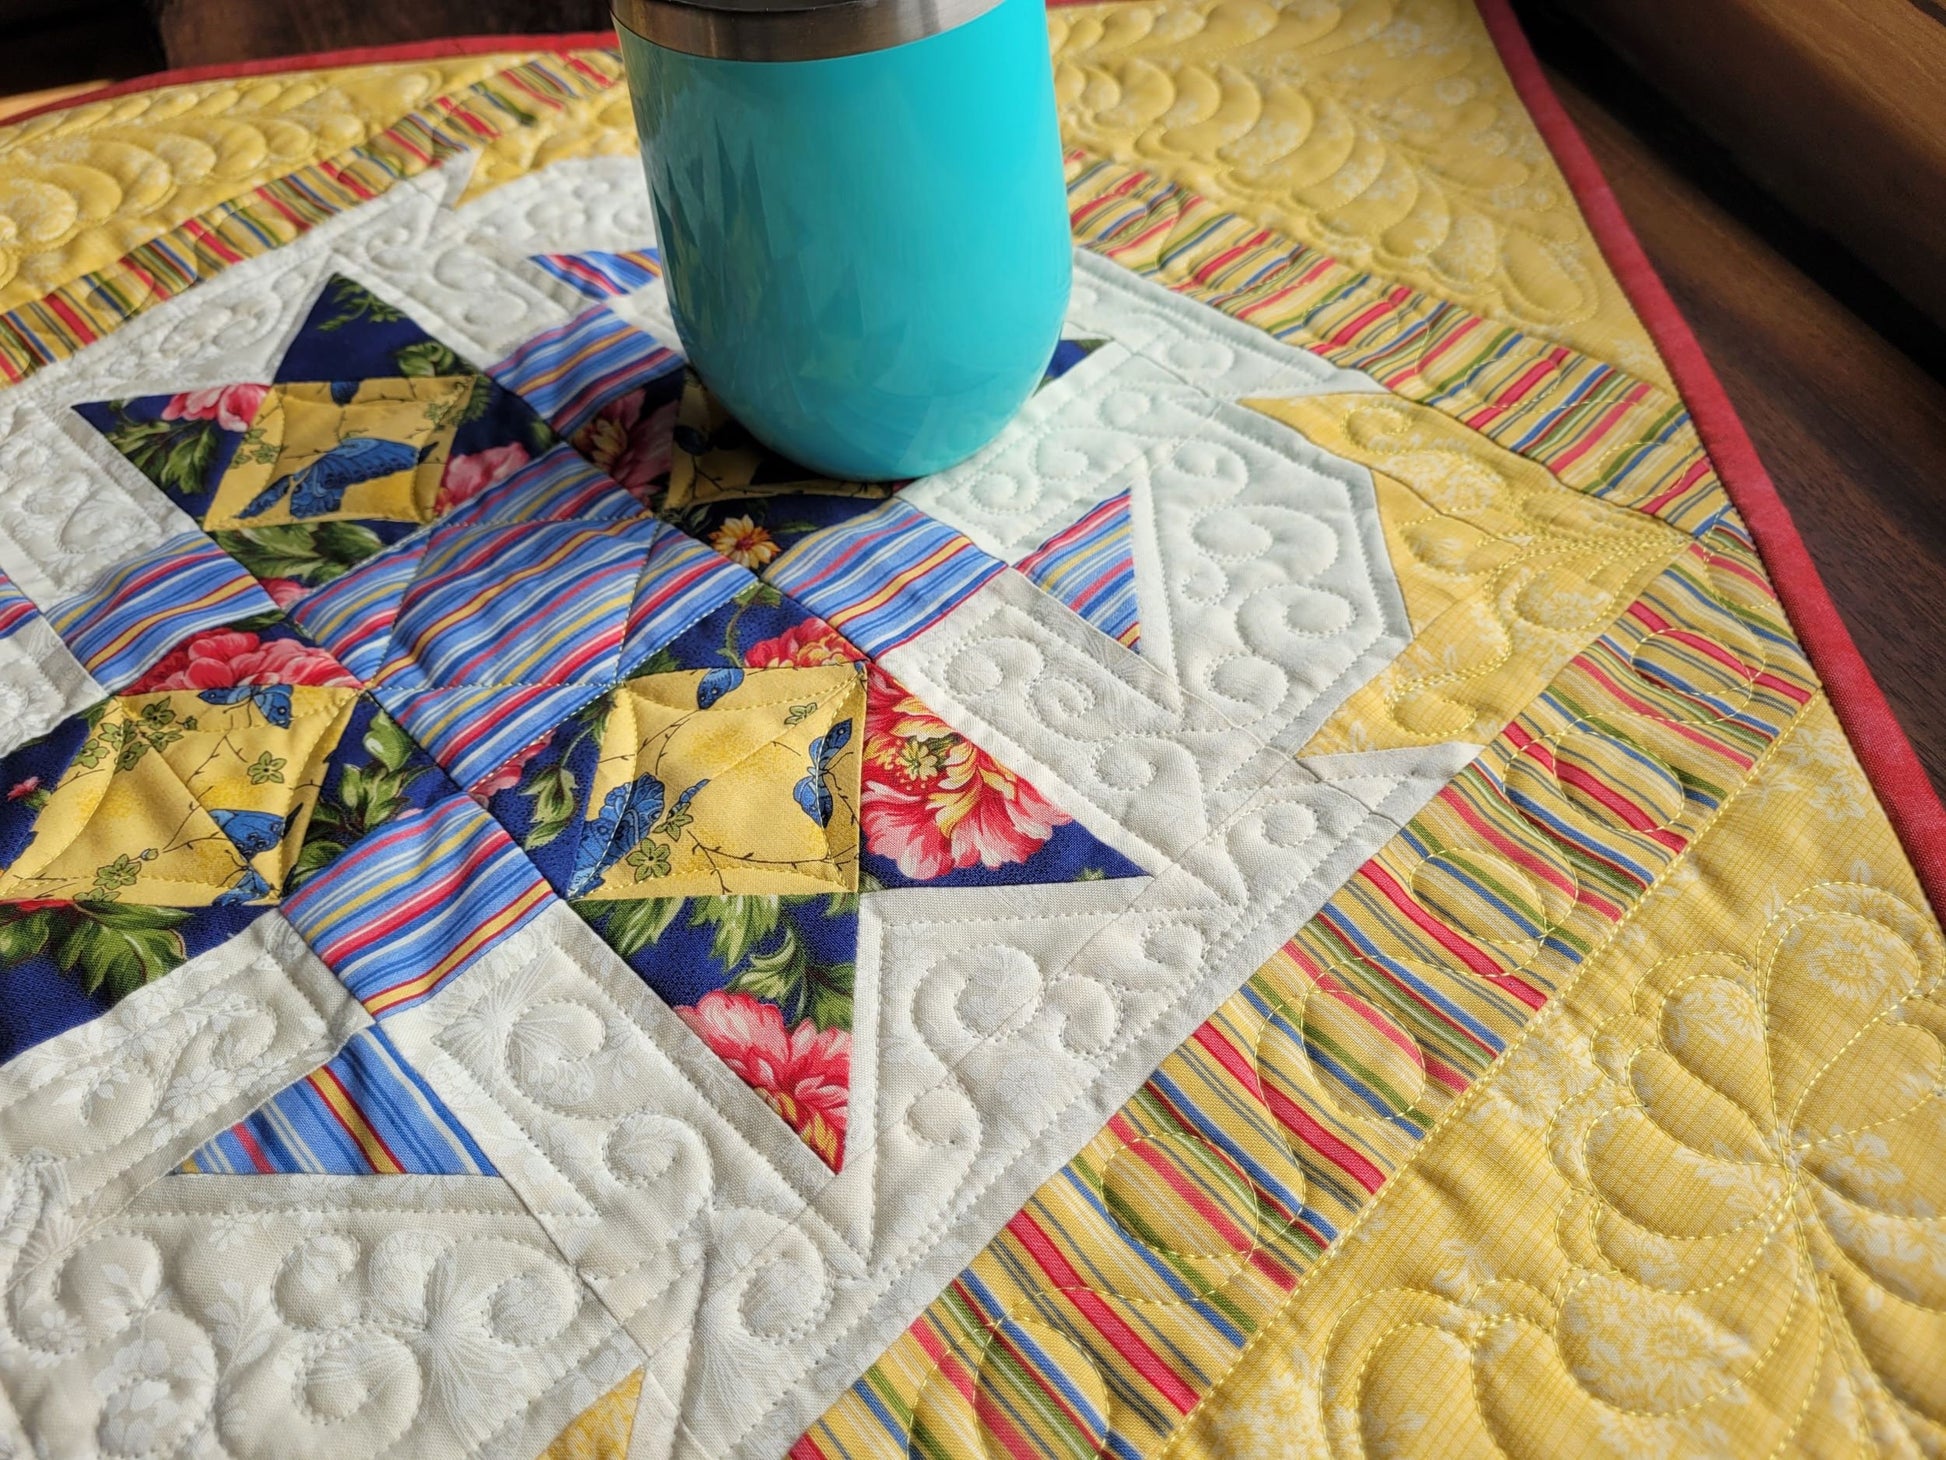 Yellow Star Quilted Table Topper or Wall Hanging, Summer Home Decor